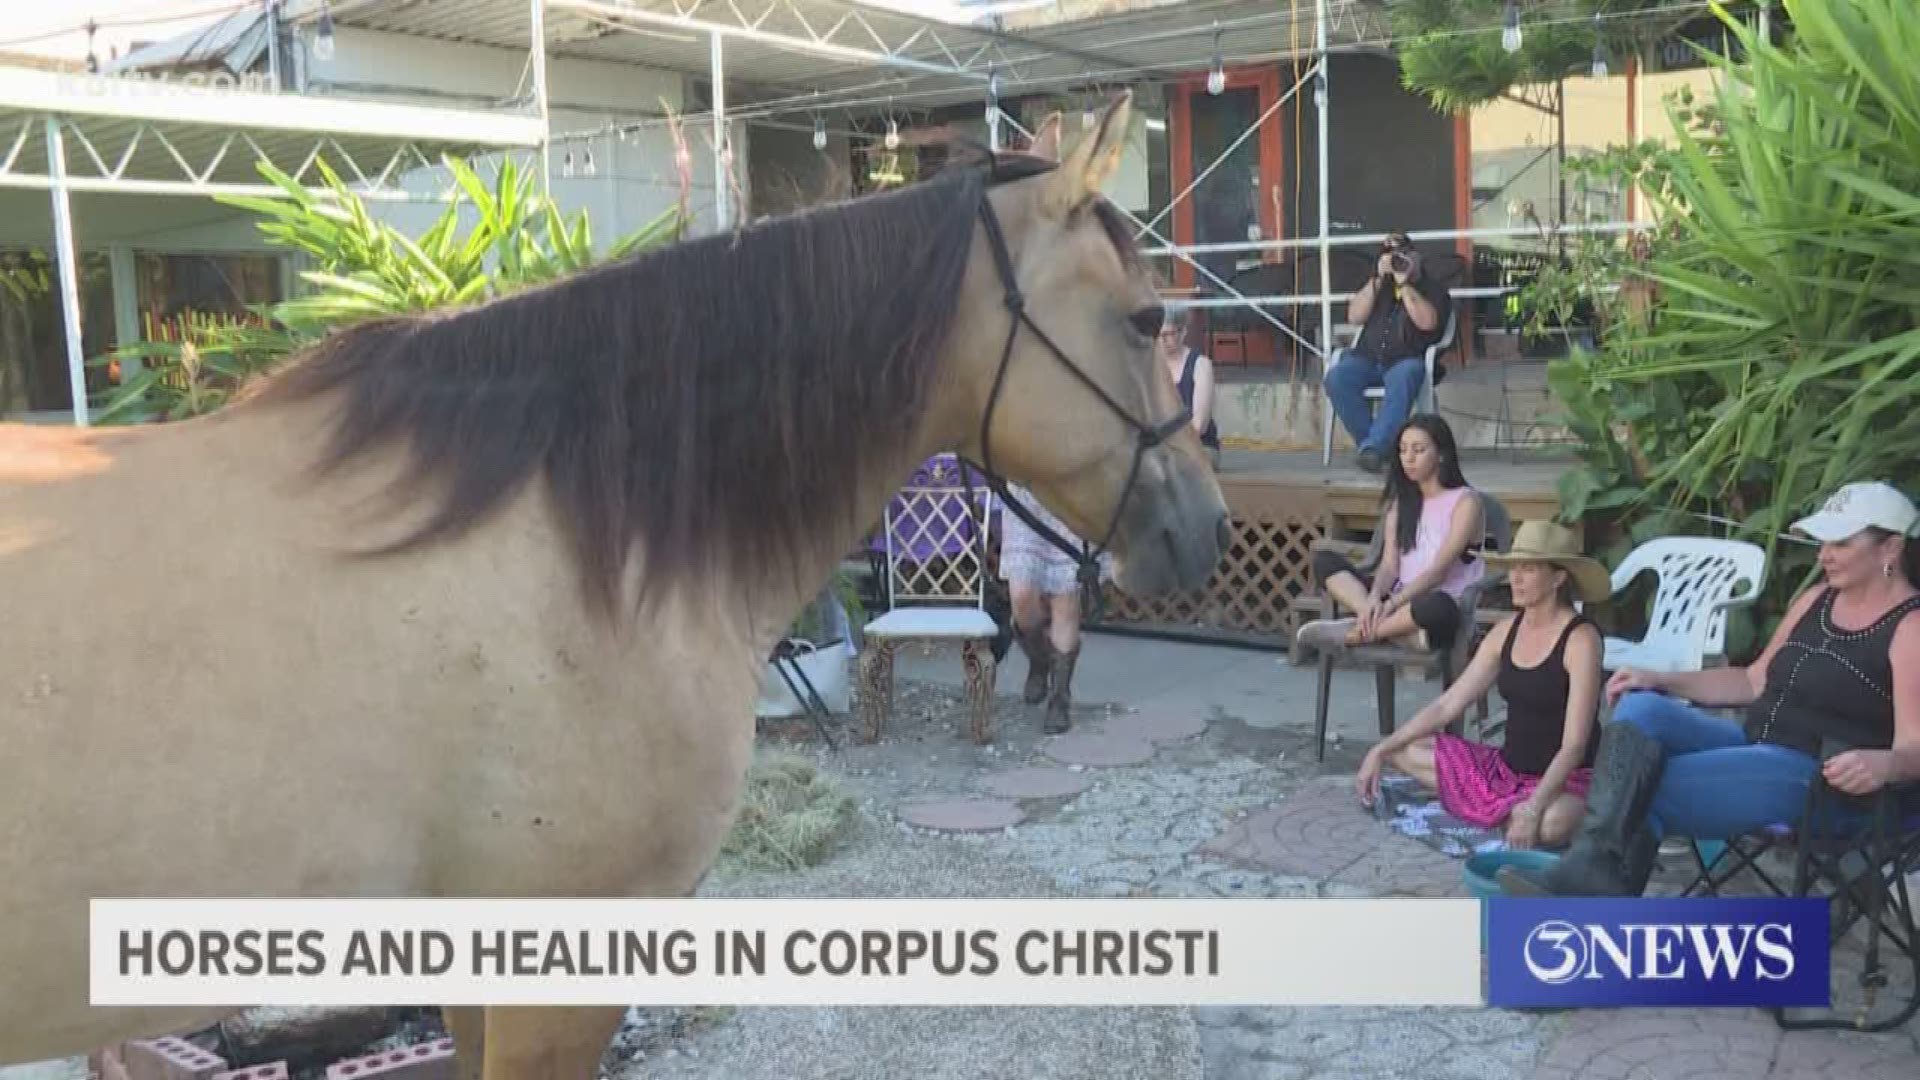 A meditation with horses was held in Corpus Christi